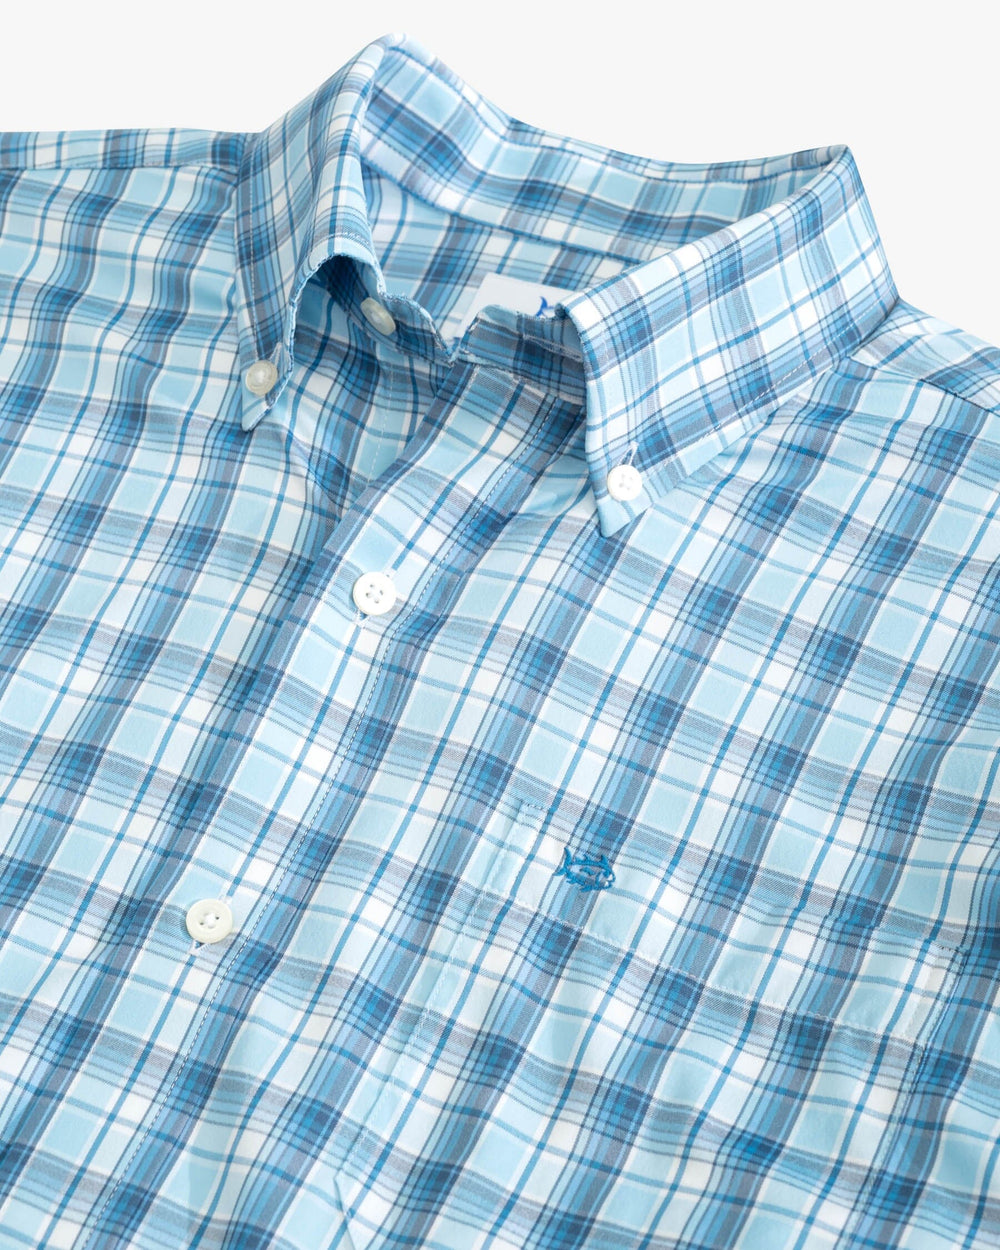 The detail view of the Southern Tide brrr Tidepointe Plaid Intercoastal Sport Shirt by Southern Tide - Rain Water